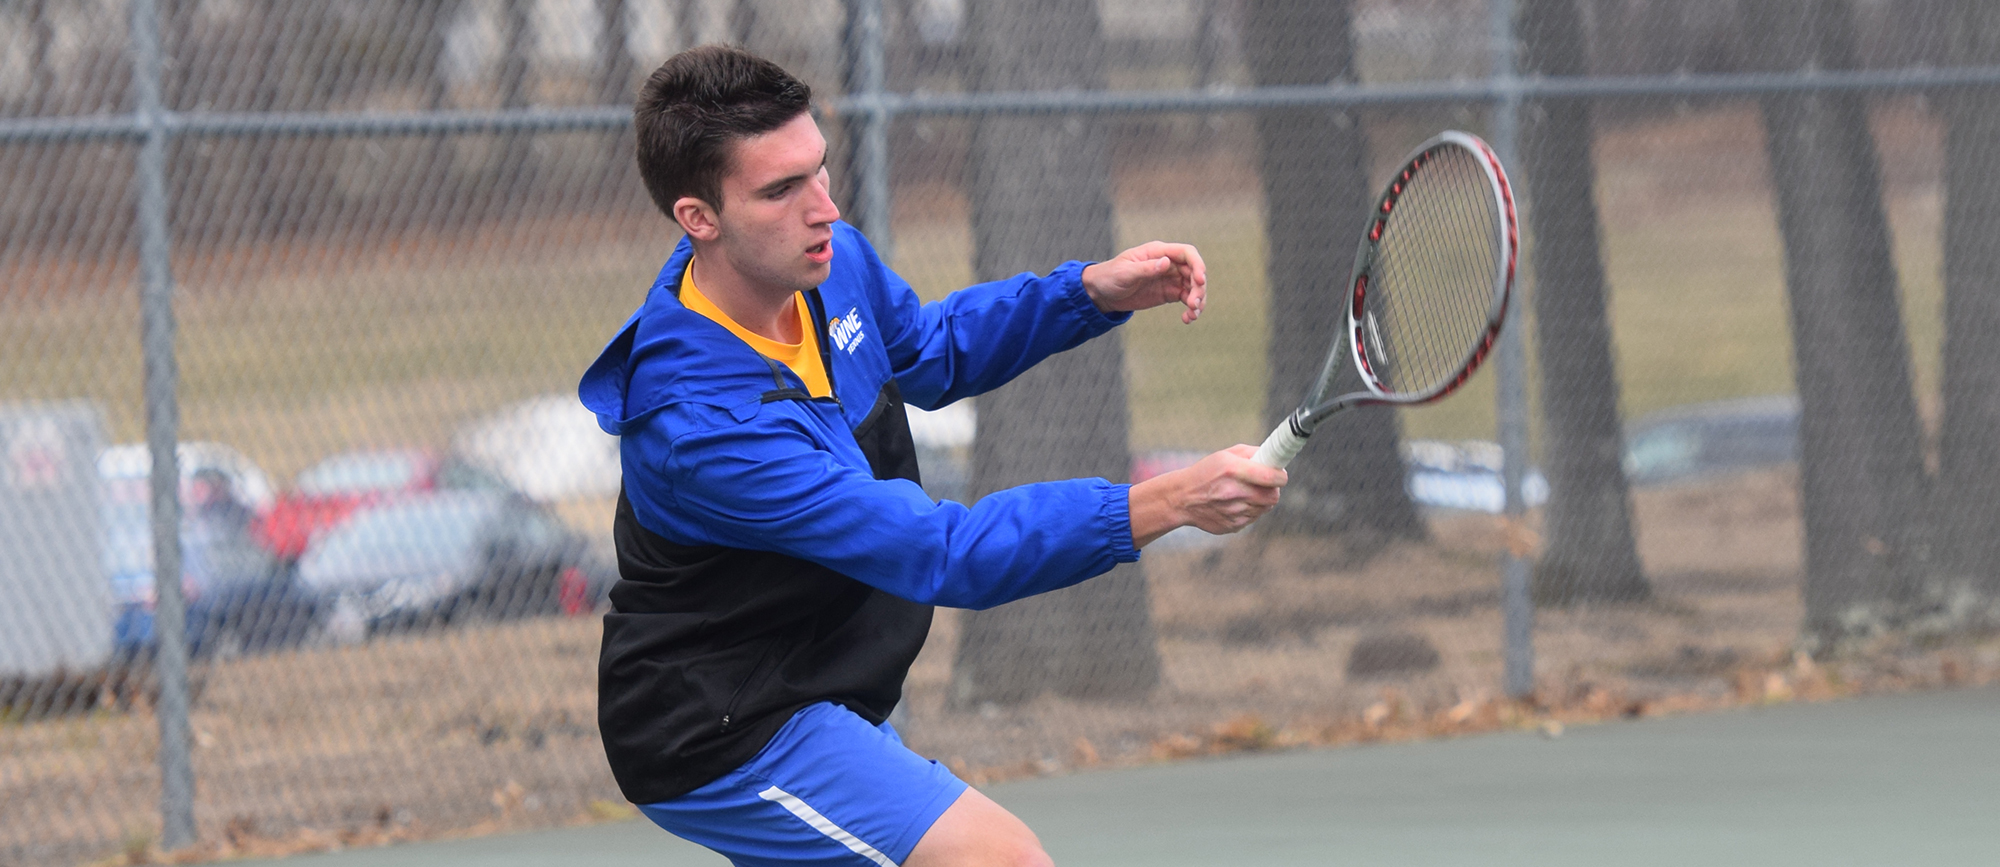 Sophomore Griffin Arnold posted a 6-1, 6-1 win at No. 5 singles in Western New England's 7-2 loss to Gordon on Wednesday. (Photo by Rachael Margossian)